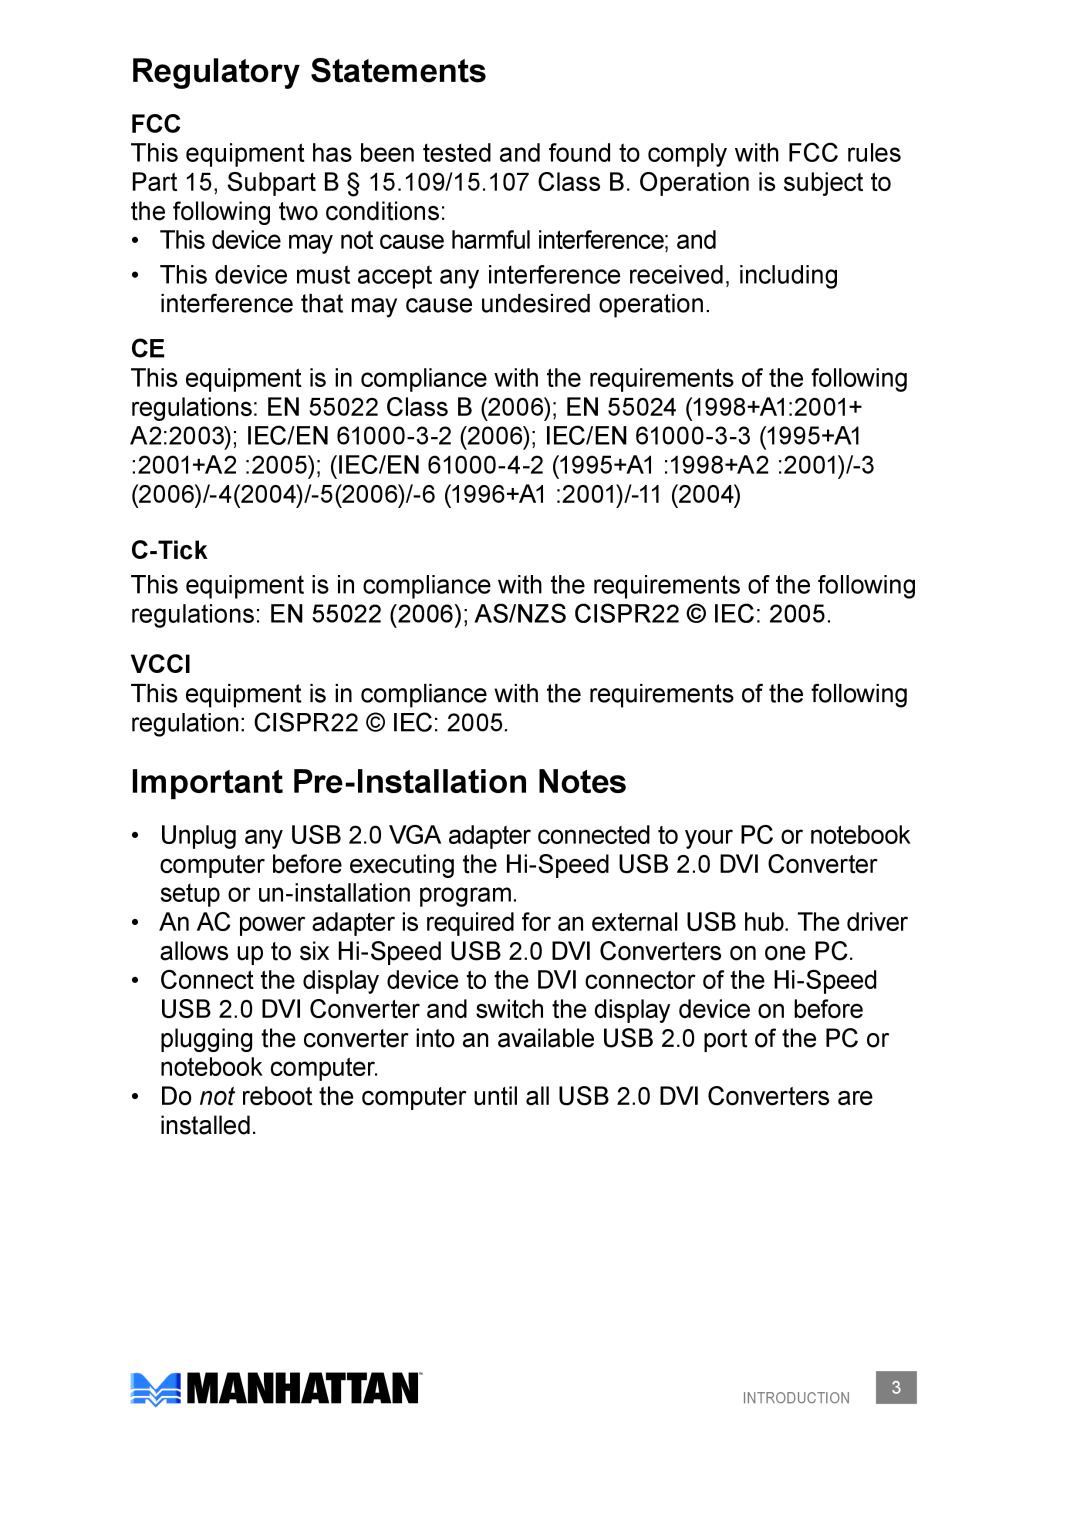 Manhattan Computer Products 179133 user manual Regulatory Statements, Important Pre-InstallationNotes, C-Tick, Vcci 